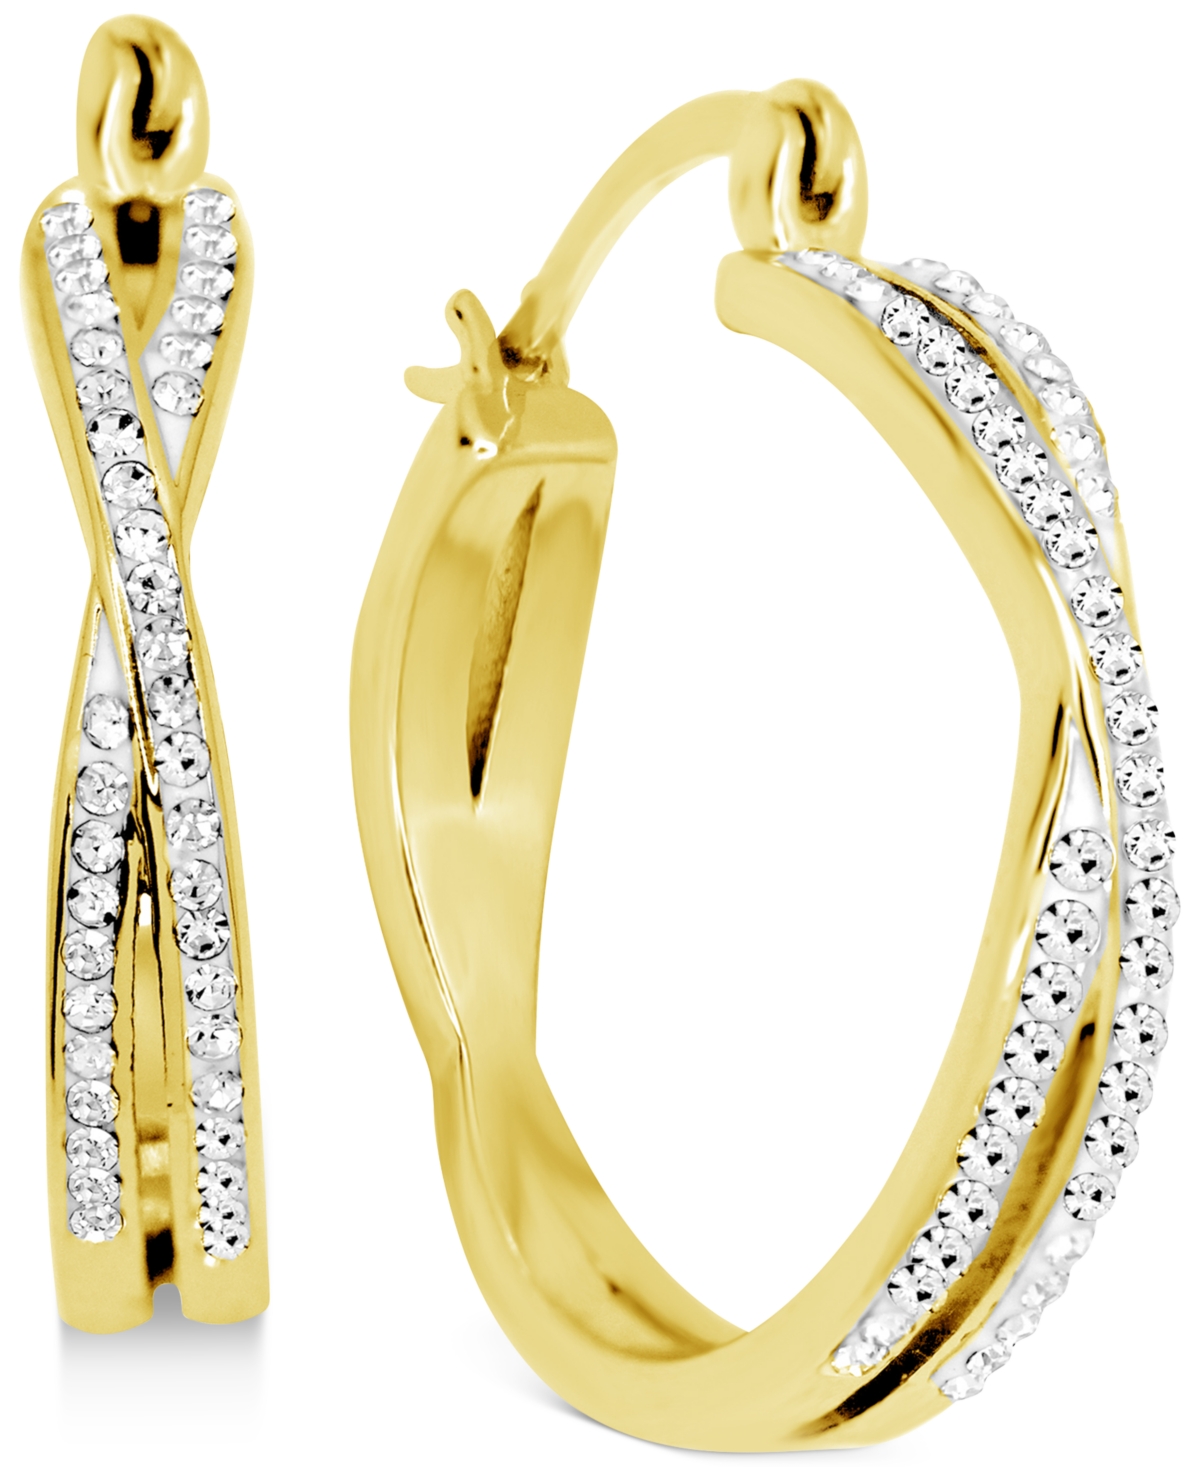 Crystal Small Crossover Hoop Earrings, 0.95" in Silver Plate or Gold Plate - Gold